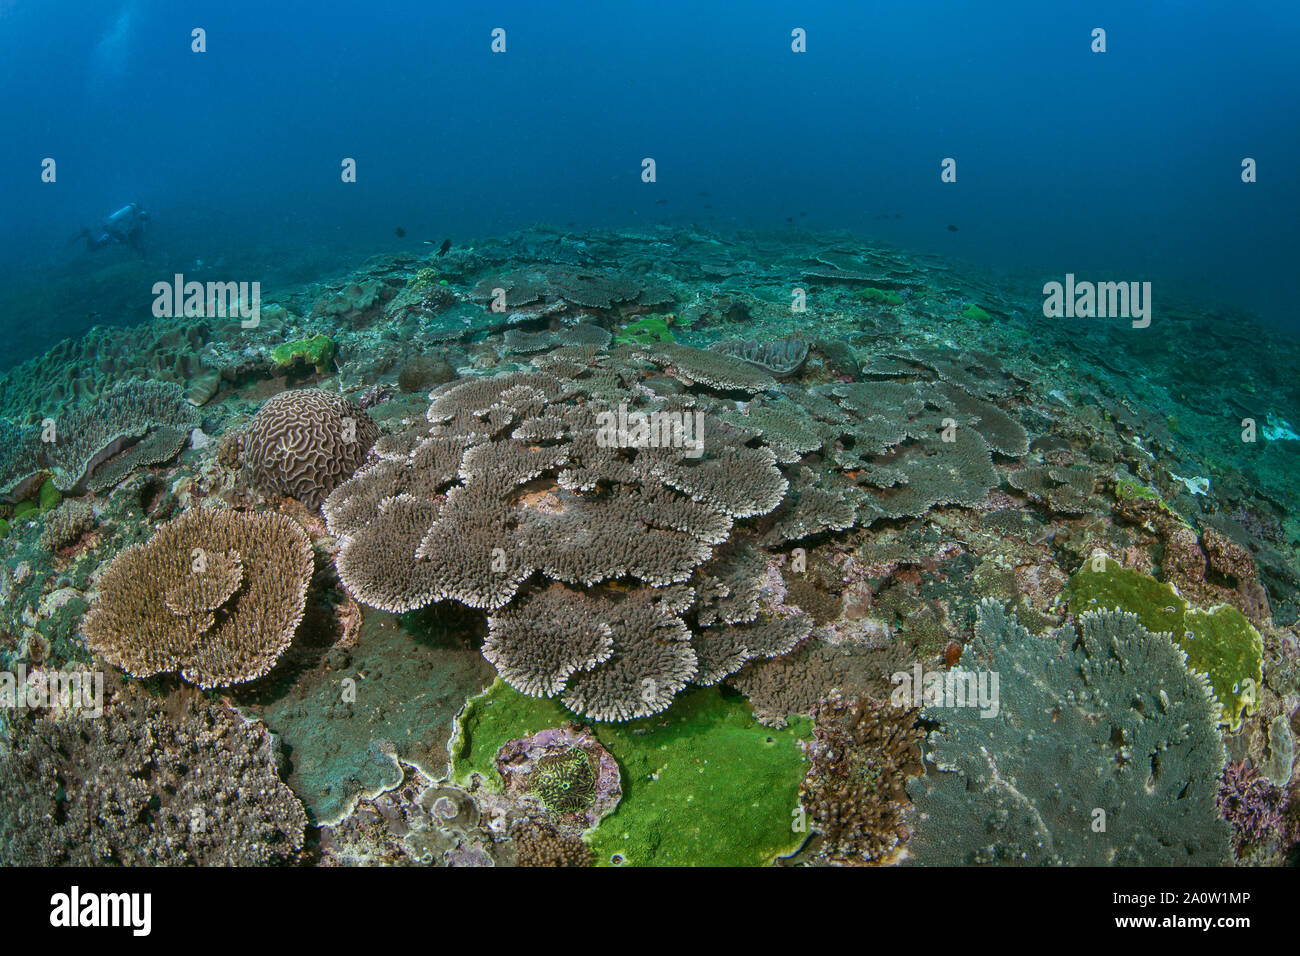 Scuba diver (silhouetted in blue water background) explores massive table corals on ocean floor. Nusa Lembongan, Bali, Indonesia. Stock Photo